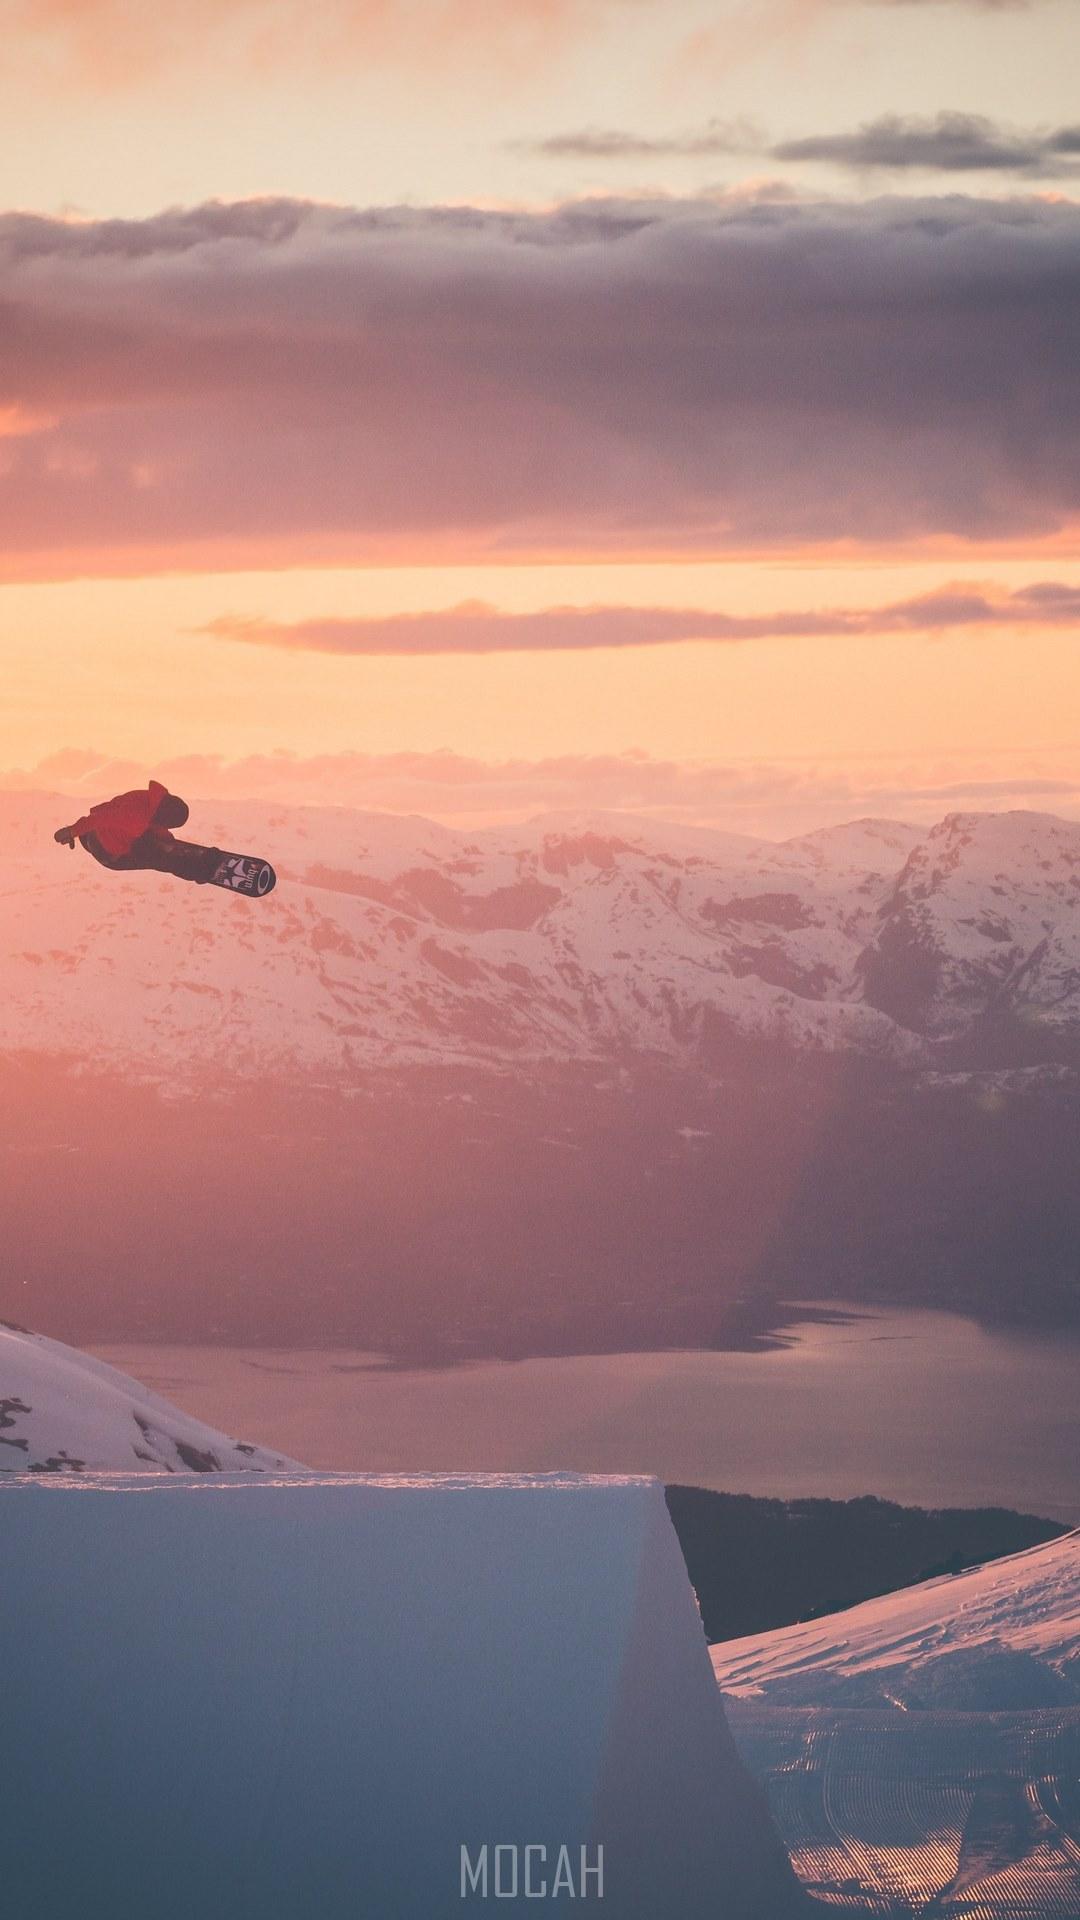 HD wallpaper, A Snowboarder Is Airborne Surrounded By Golden Skies And Snowy Mountains, 1080X1920, Snowboarder In Flight, Xiaomi Mi 6 Wallpaper Hd Free Download